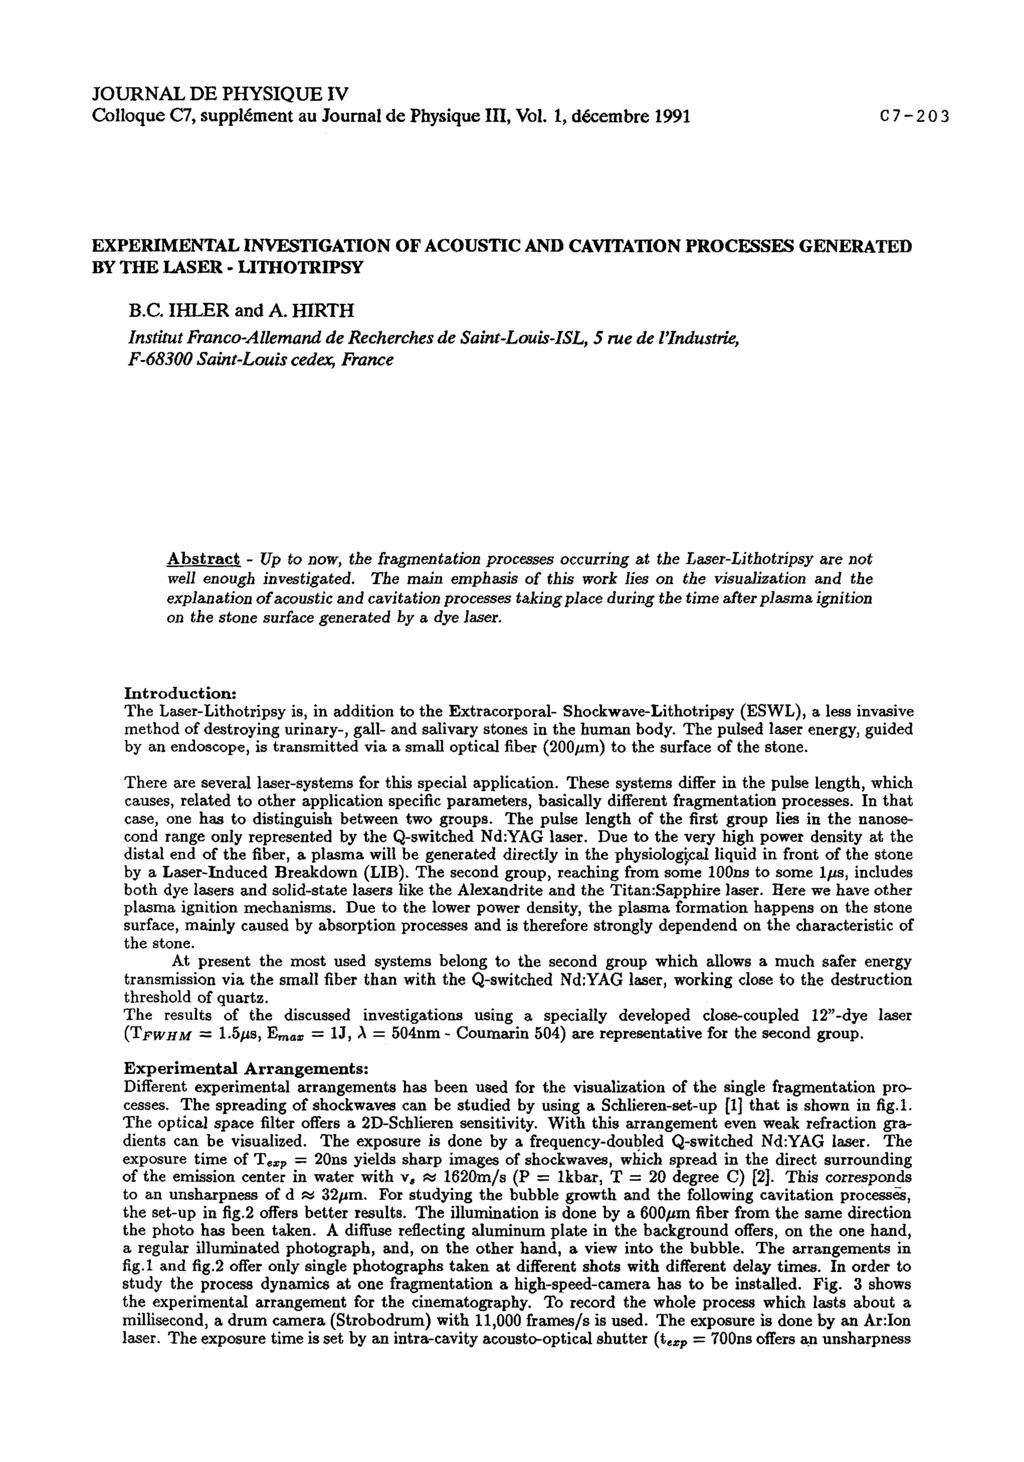 JOURNAL DE PHYSIQUE IV Colloque C7, supplement au Journal de Physique In, Vol. 1, dkembre 1991 EXPERIMENTAL INVESTIGATION OF ACOUSTIC AND CAVITATION PROCESSES GENERATED BY THE LASER - LITHOTRIPSY B.C. IHLER and A.